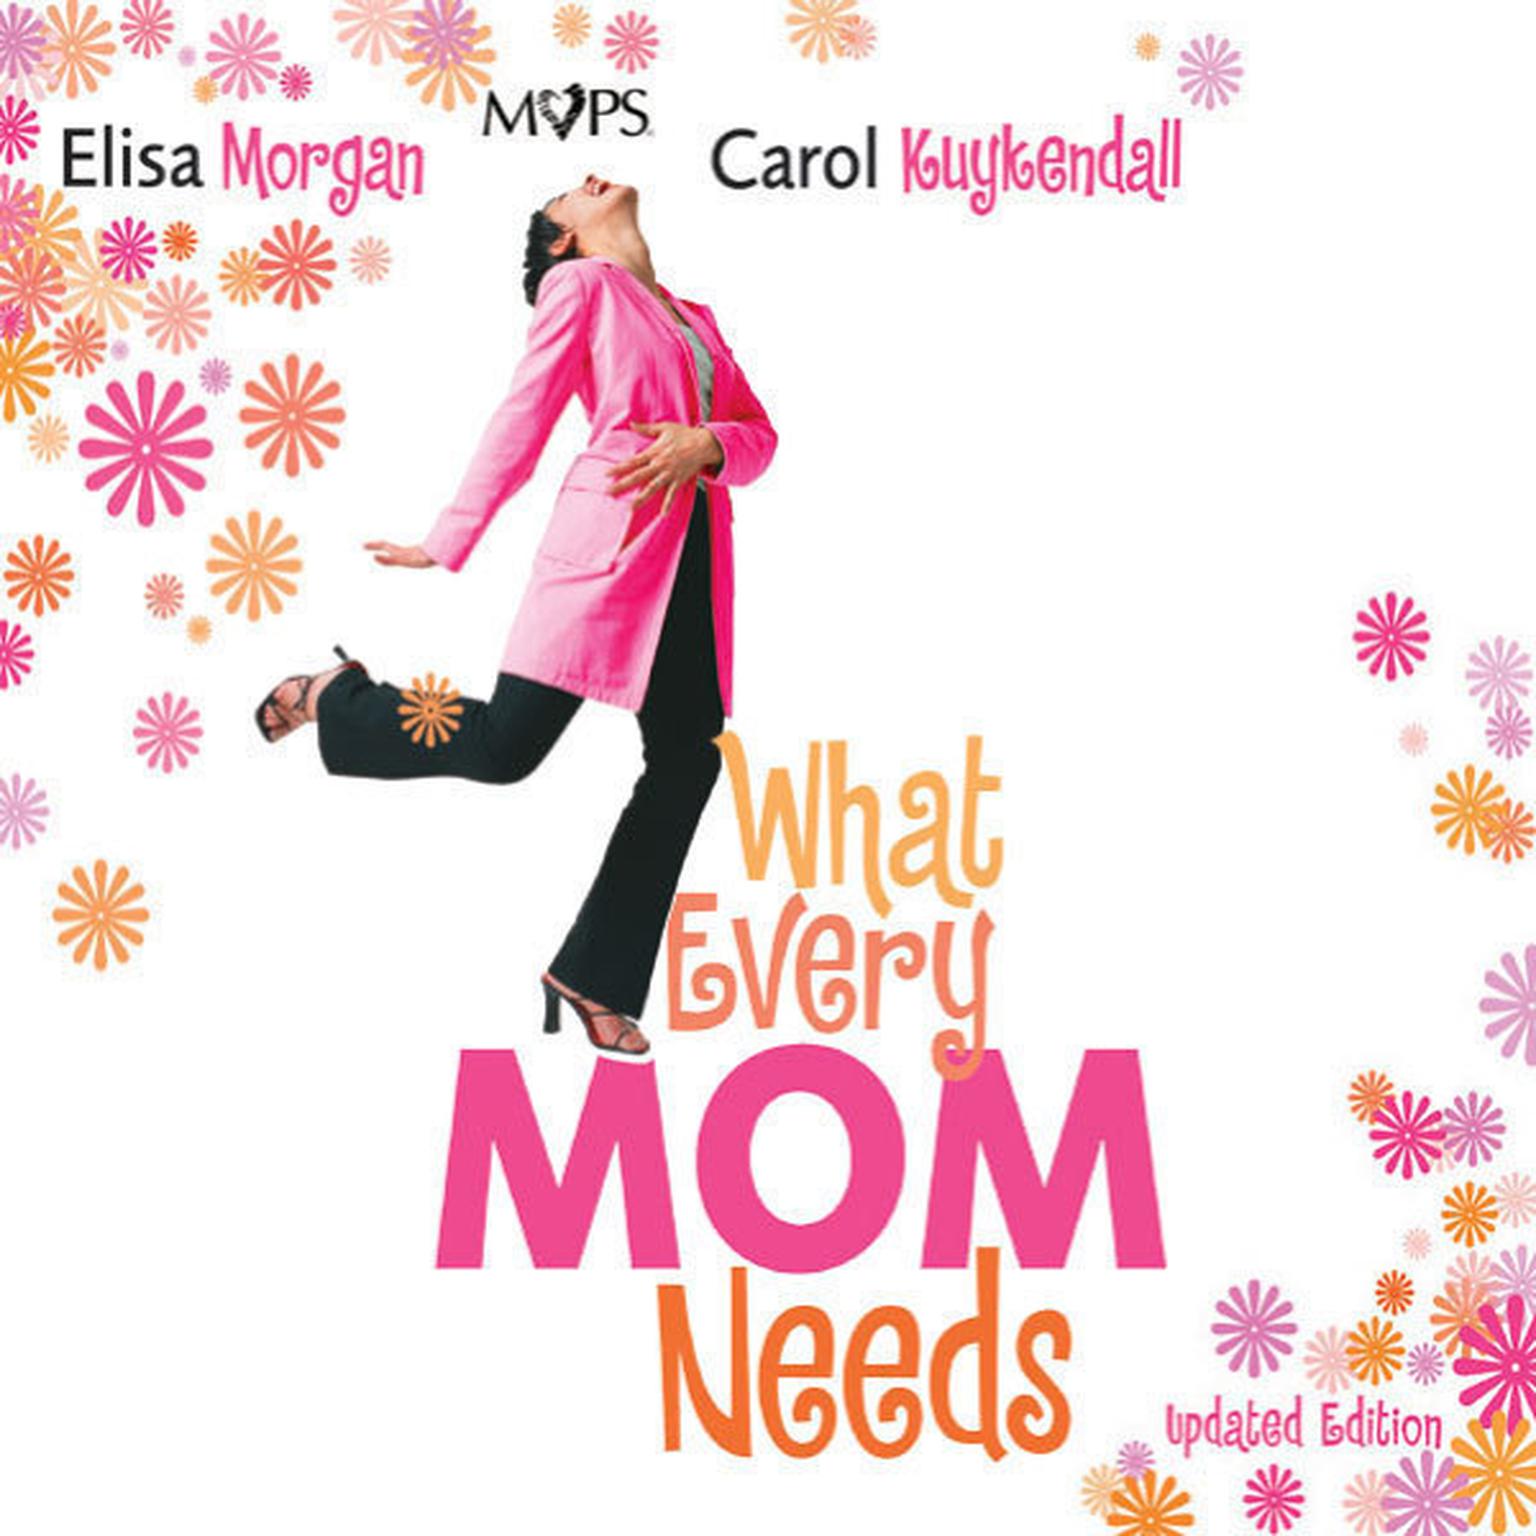 What Every Mom Needs (Abridged): Meet Your Nine Basic Needs (and Be a Better Mom) Audiobook, by Elisa Morgan